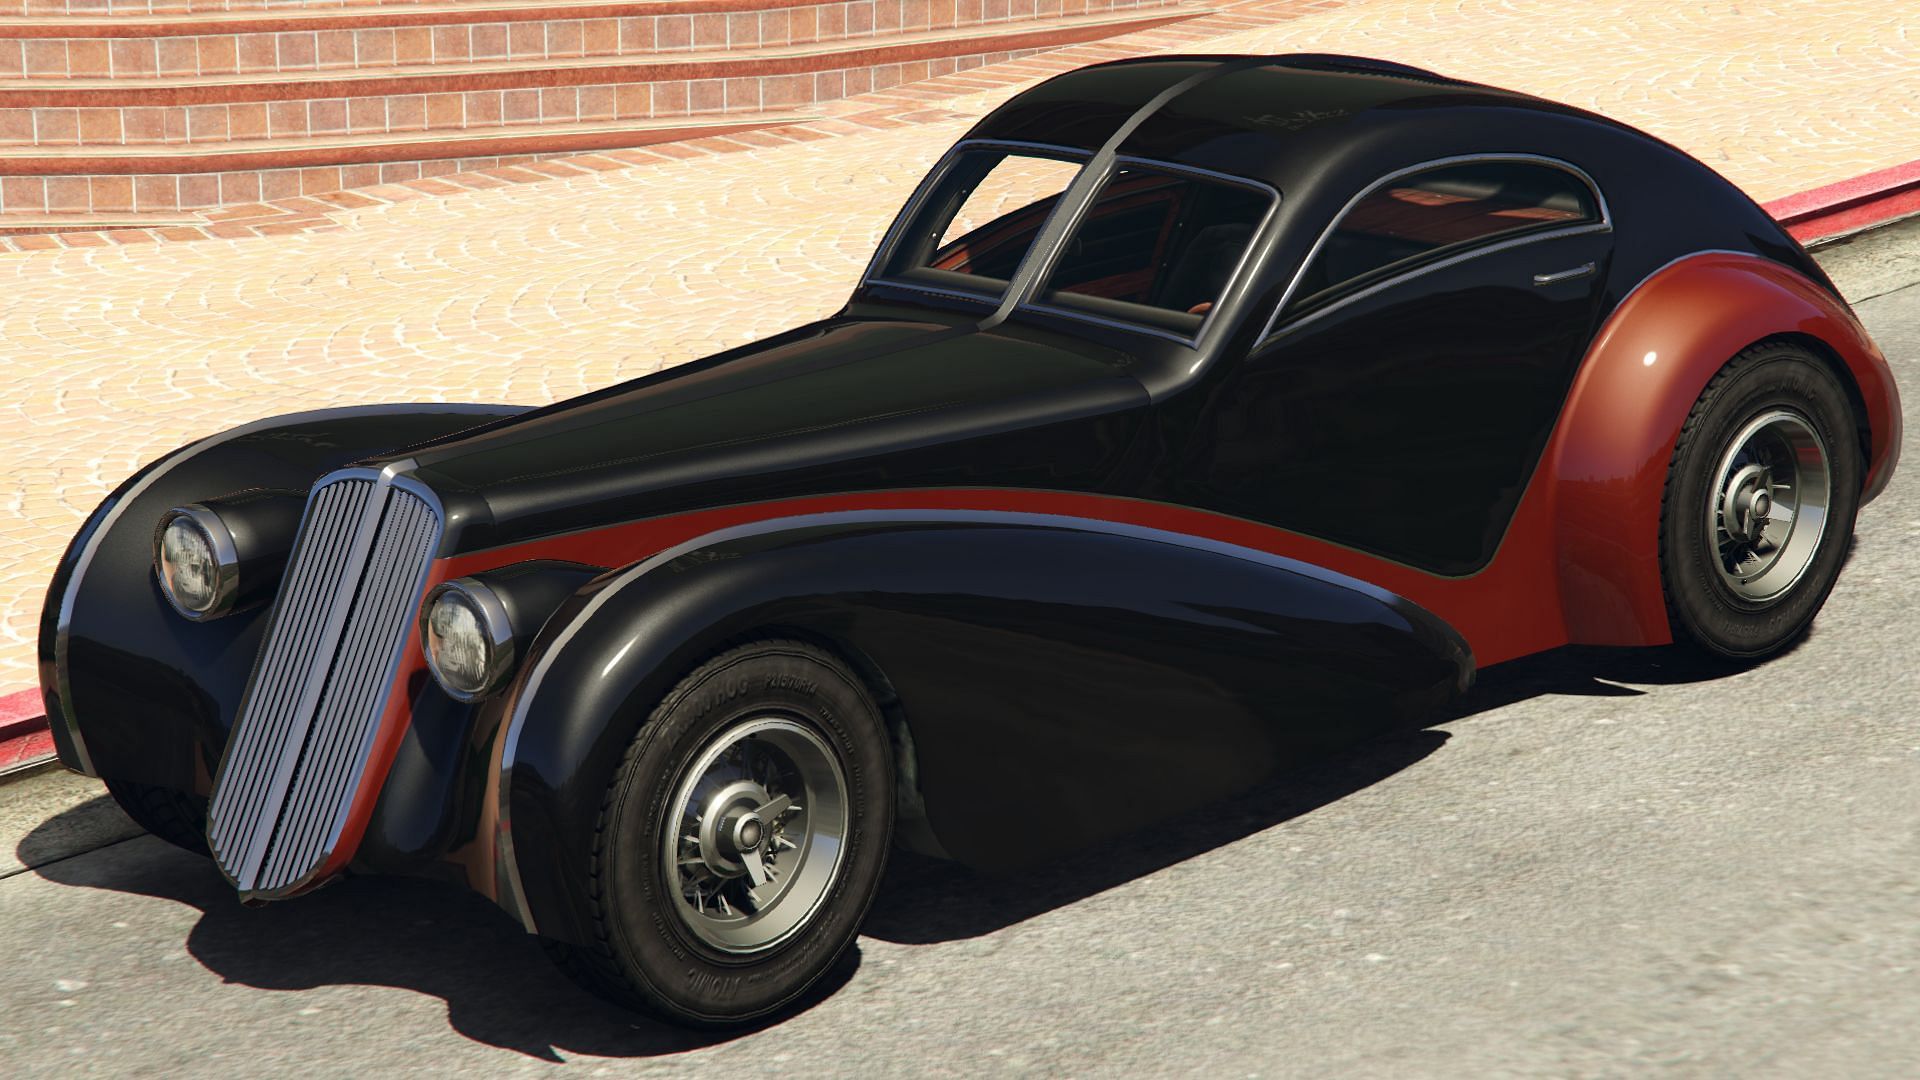 The Z-Type has been removed from GTA Online (Image via GTA Wiki)